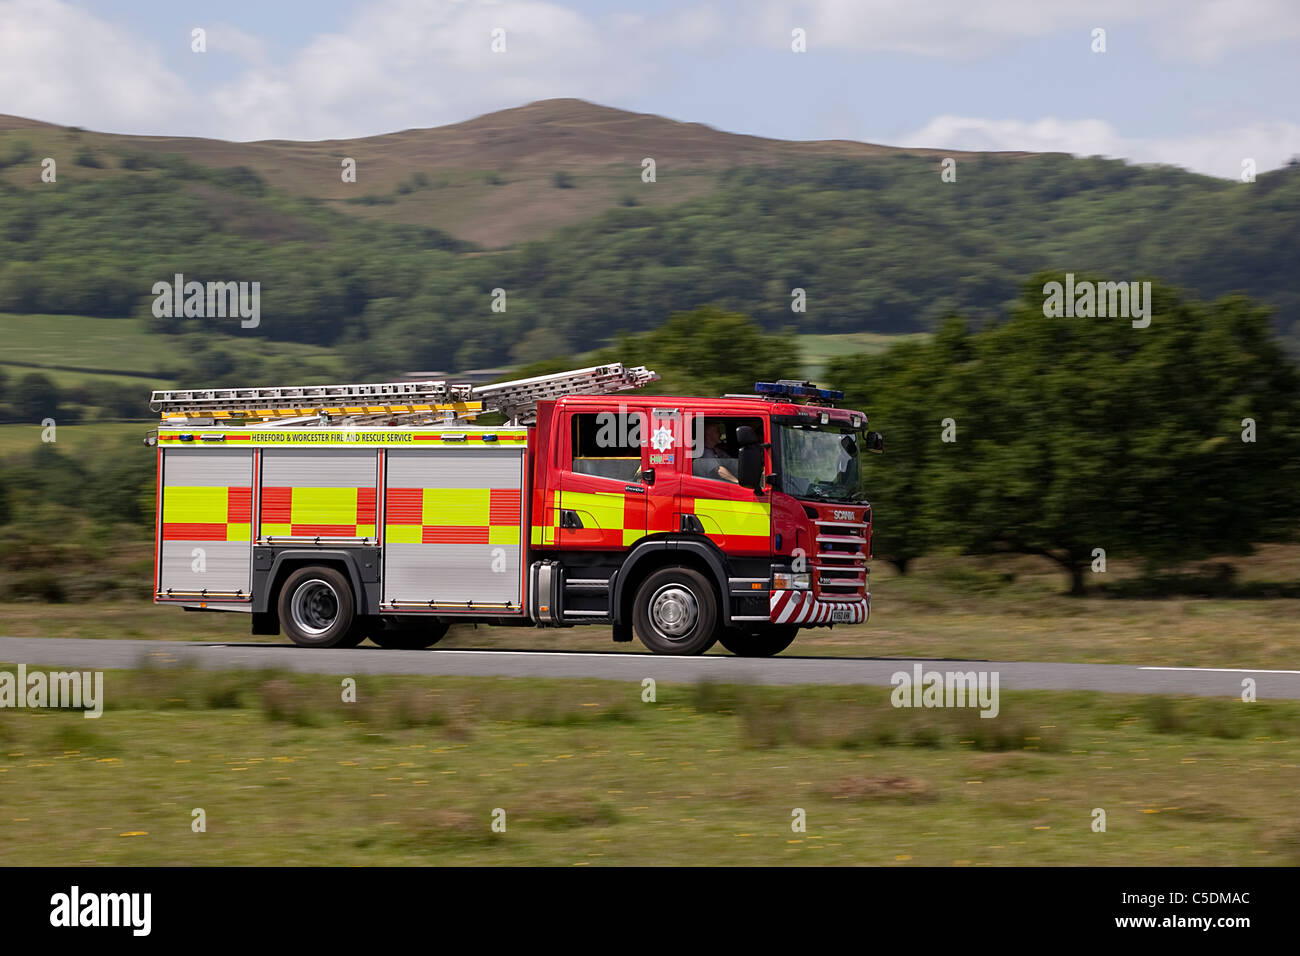 Fire engine on call in Worcestershire UK Stock Photo